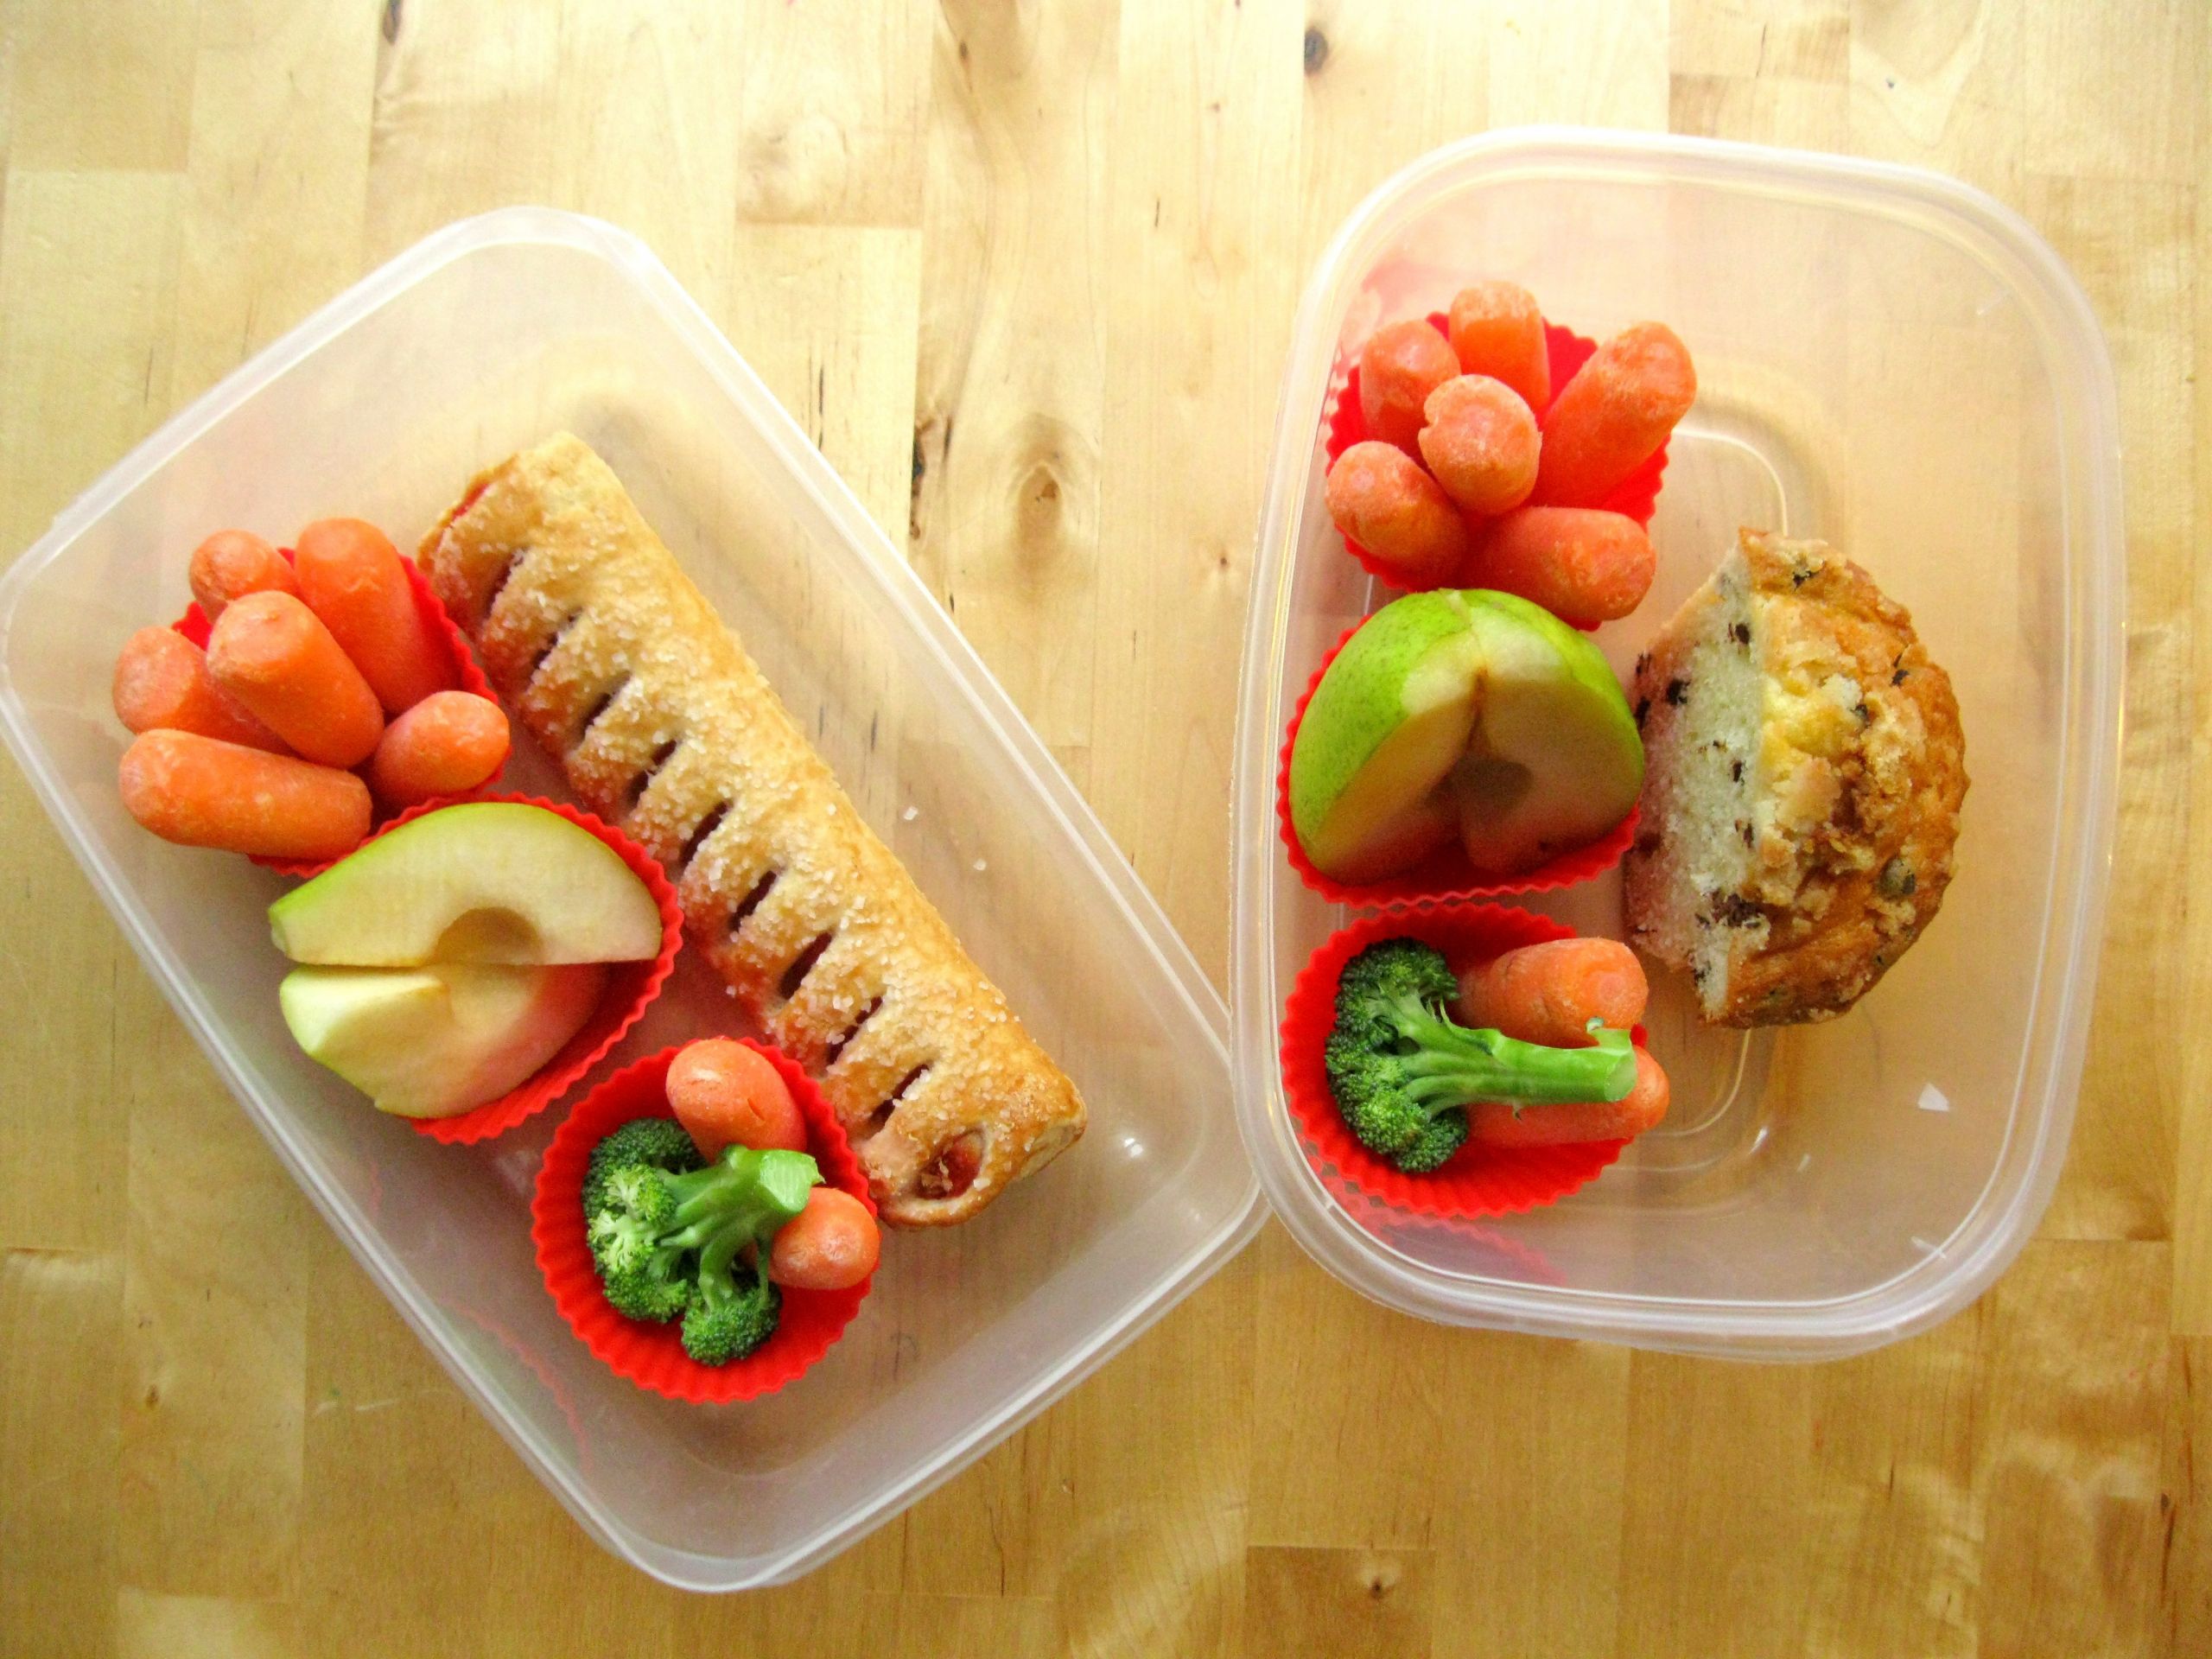 Healthy Fun Snacks For Kids
 In the Kitchen Self Serving Snack Box Tutorial and